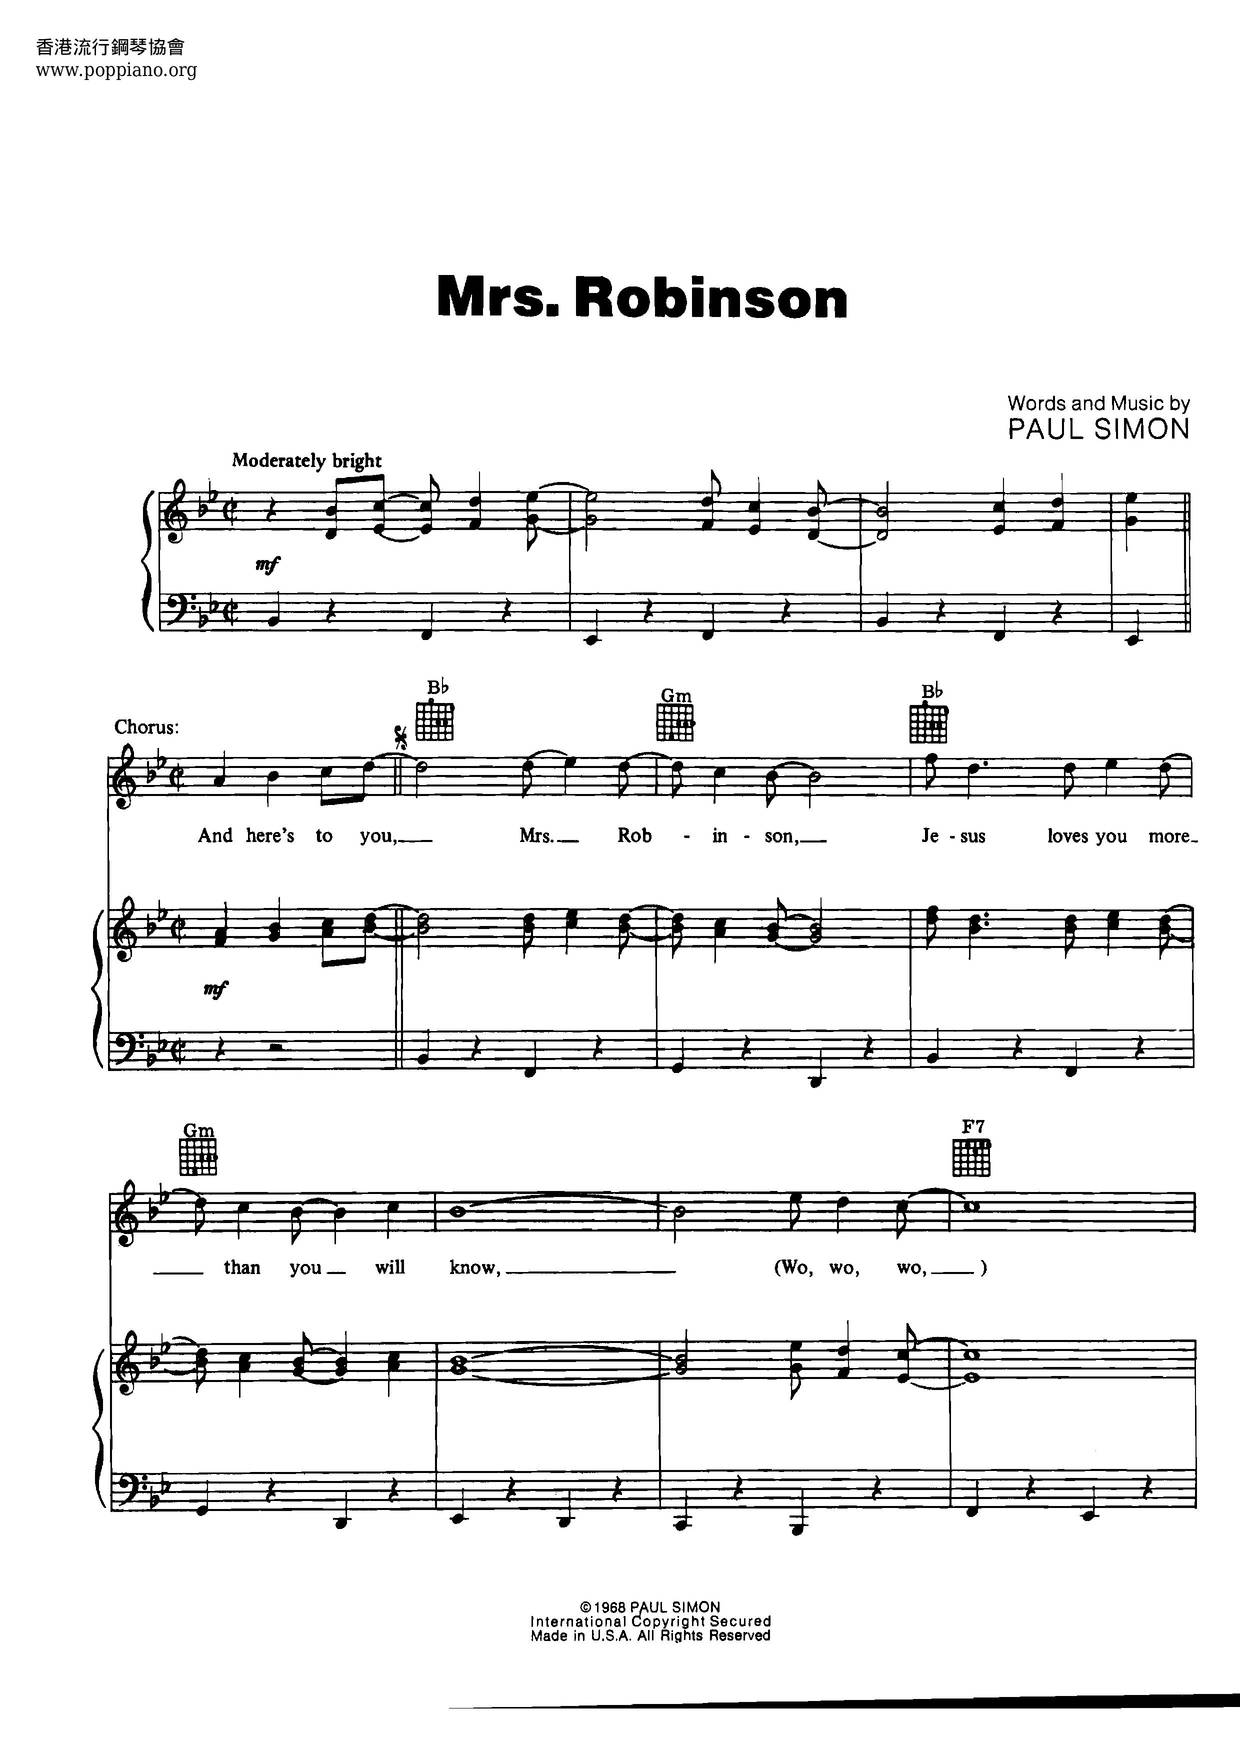 Mrs. Robinson - From The Graduate Soundtrack琴譜